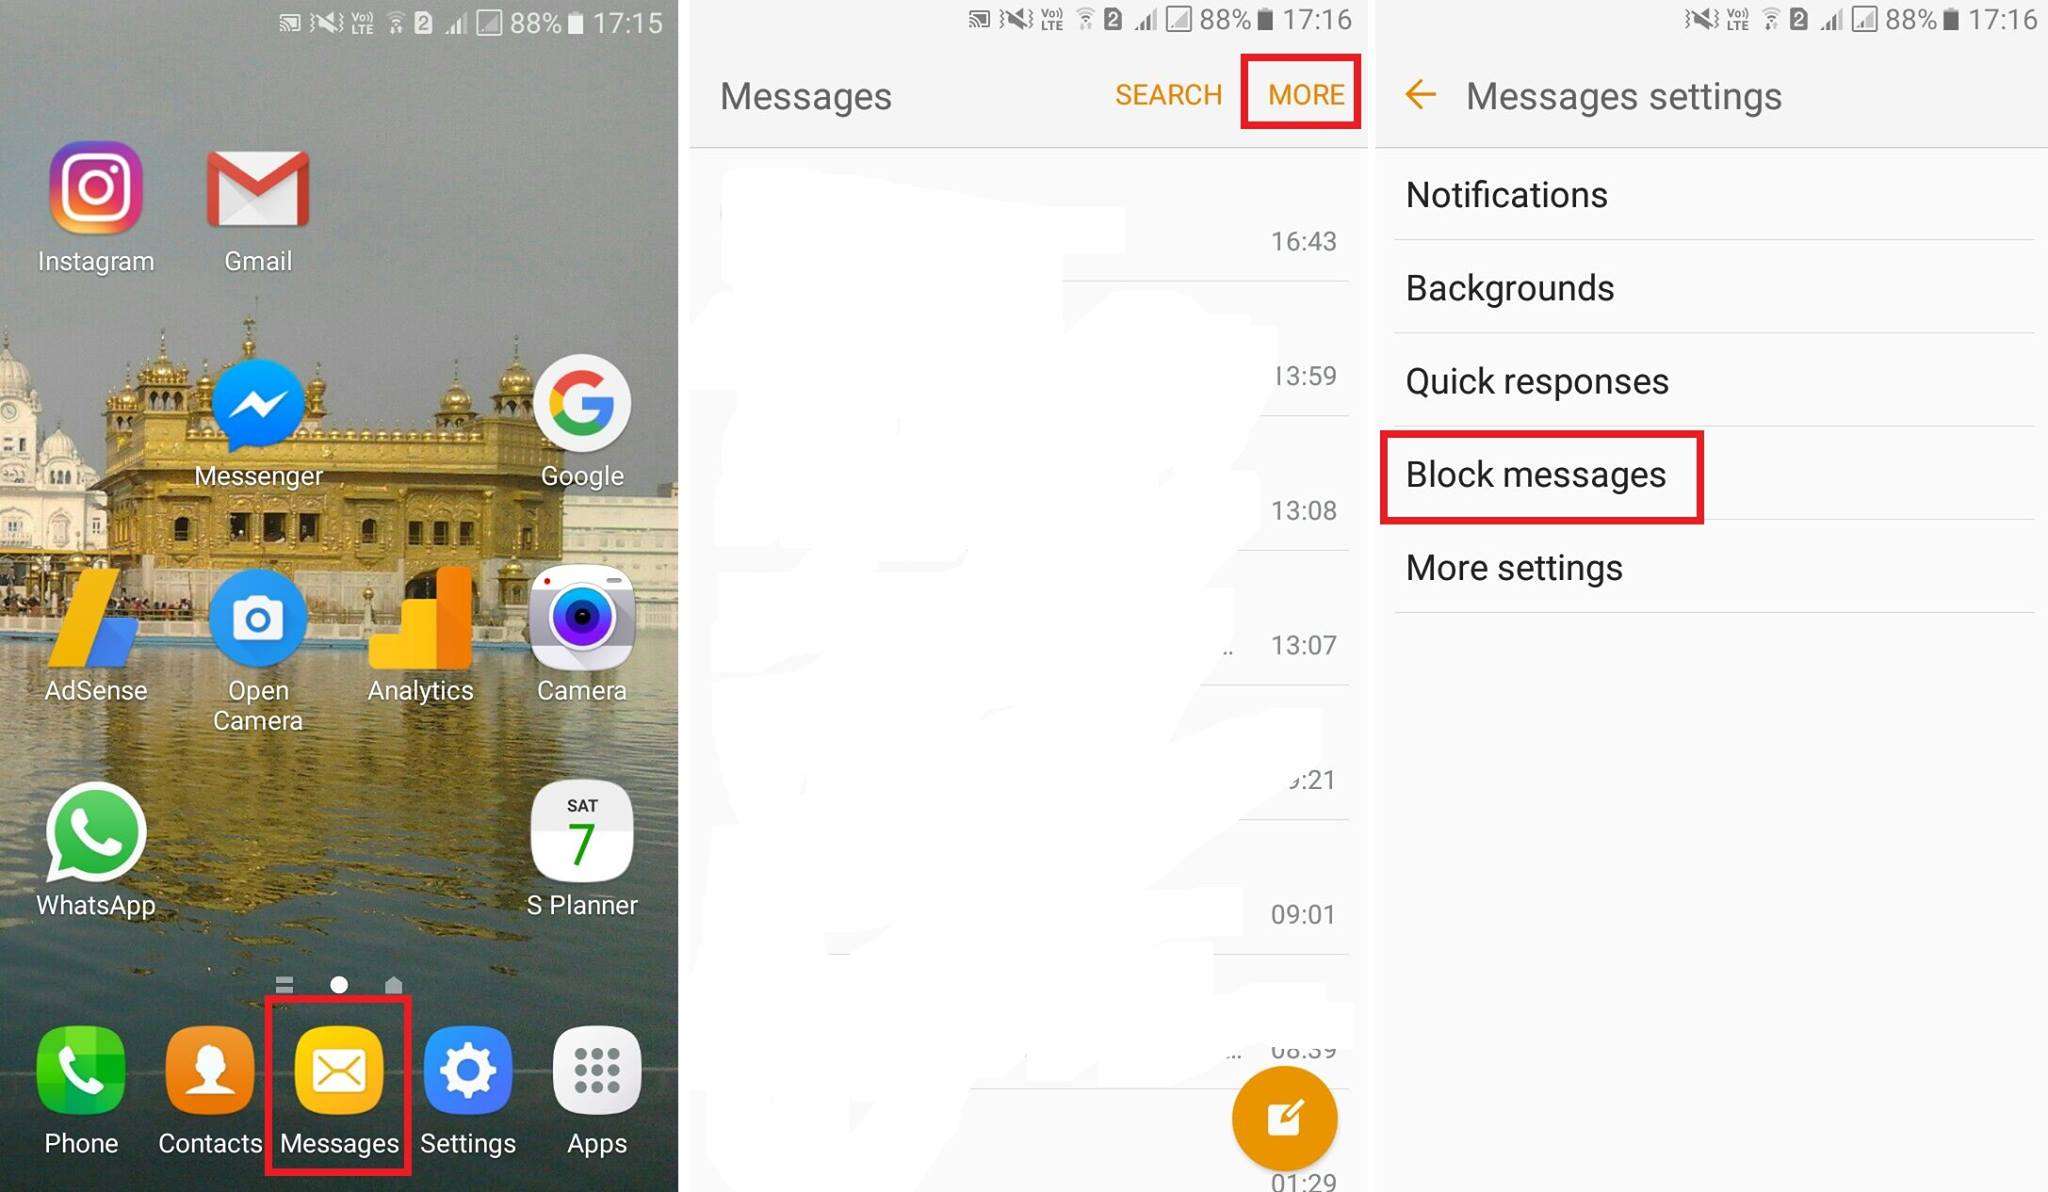 How to Block someone from Texting you on Samsung Galaxy s5, s6, s7